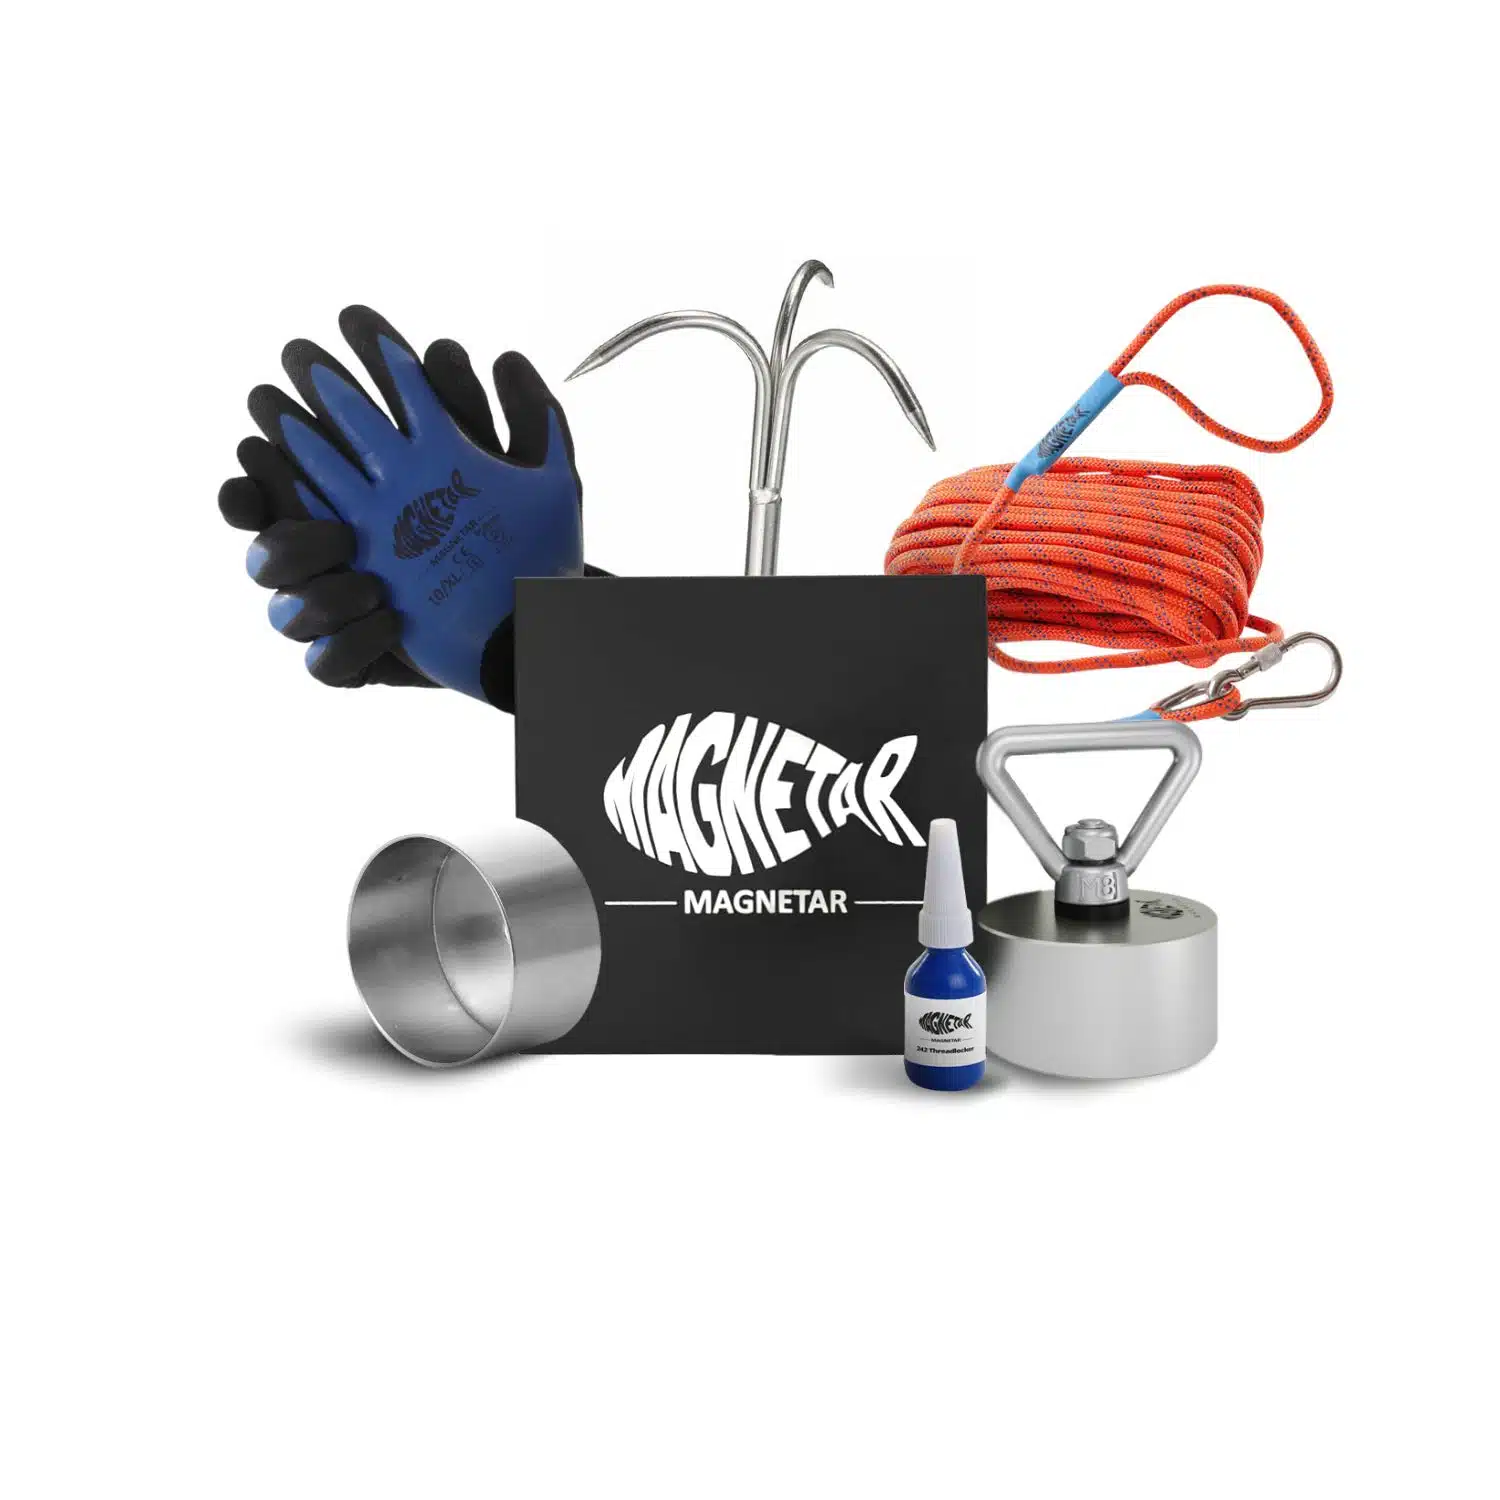  Fishing Magnet Kit, Fishing Magnets 1000 LBS  Pulling-Includes Grappling Hook, Heavy Duty 65FT Rope, Gloves & Locking  Carabiner,Threadlocker And Waterproof Carry Case